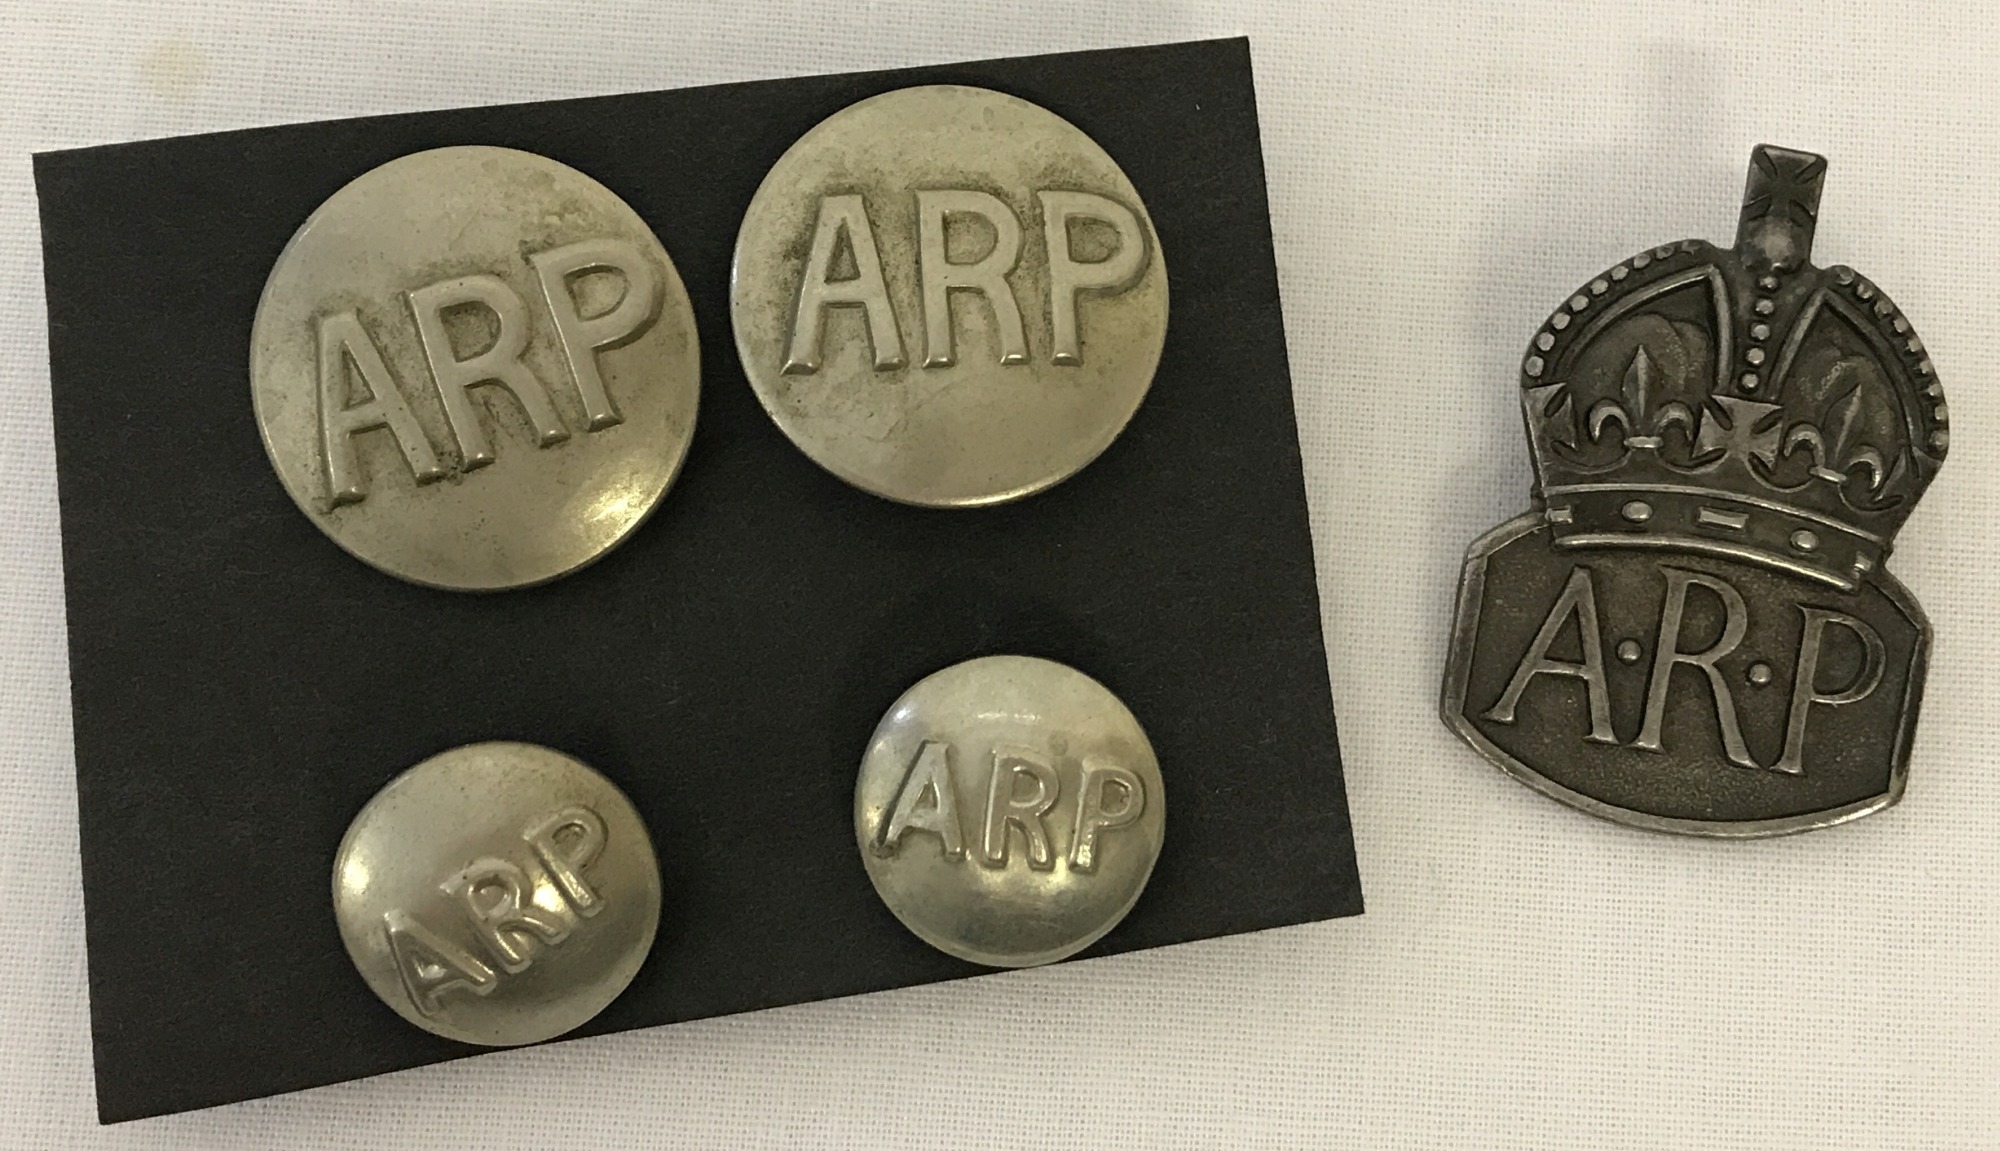 A silver ARP lapel badge together with 4 ARP buttons.